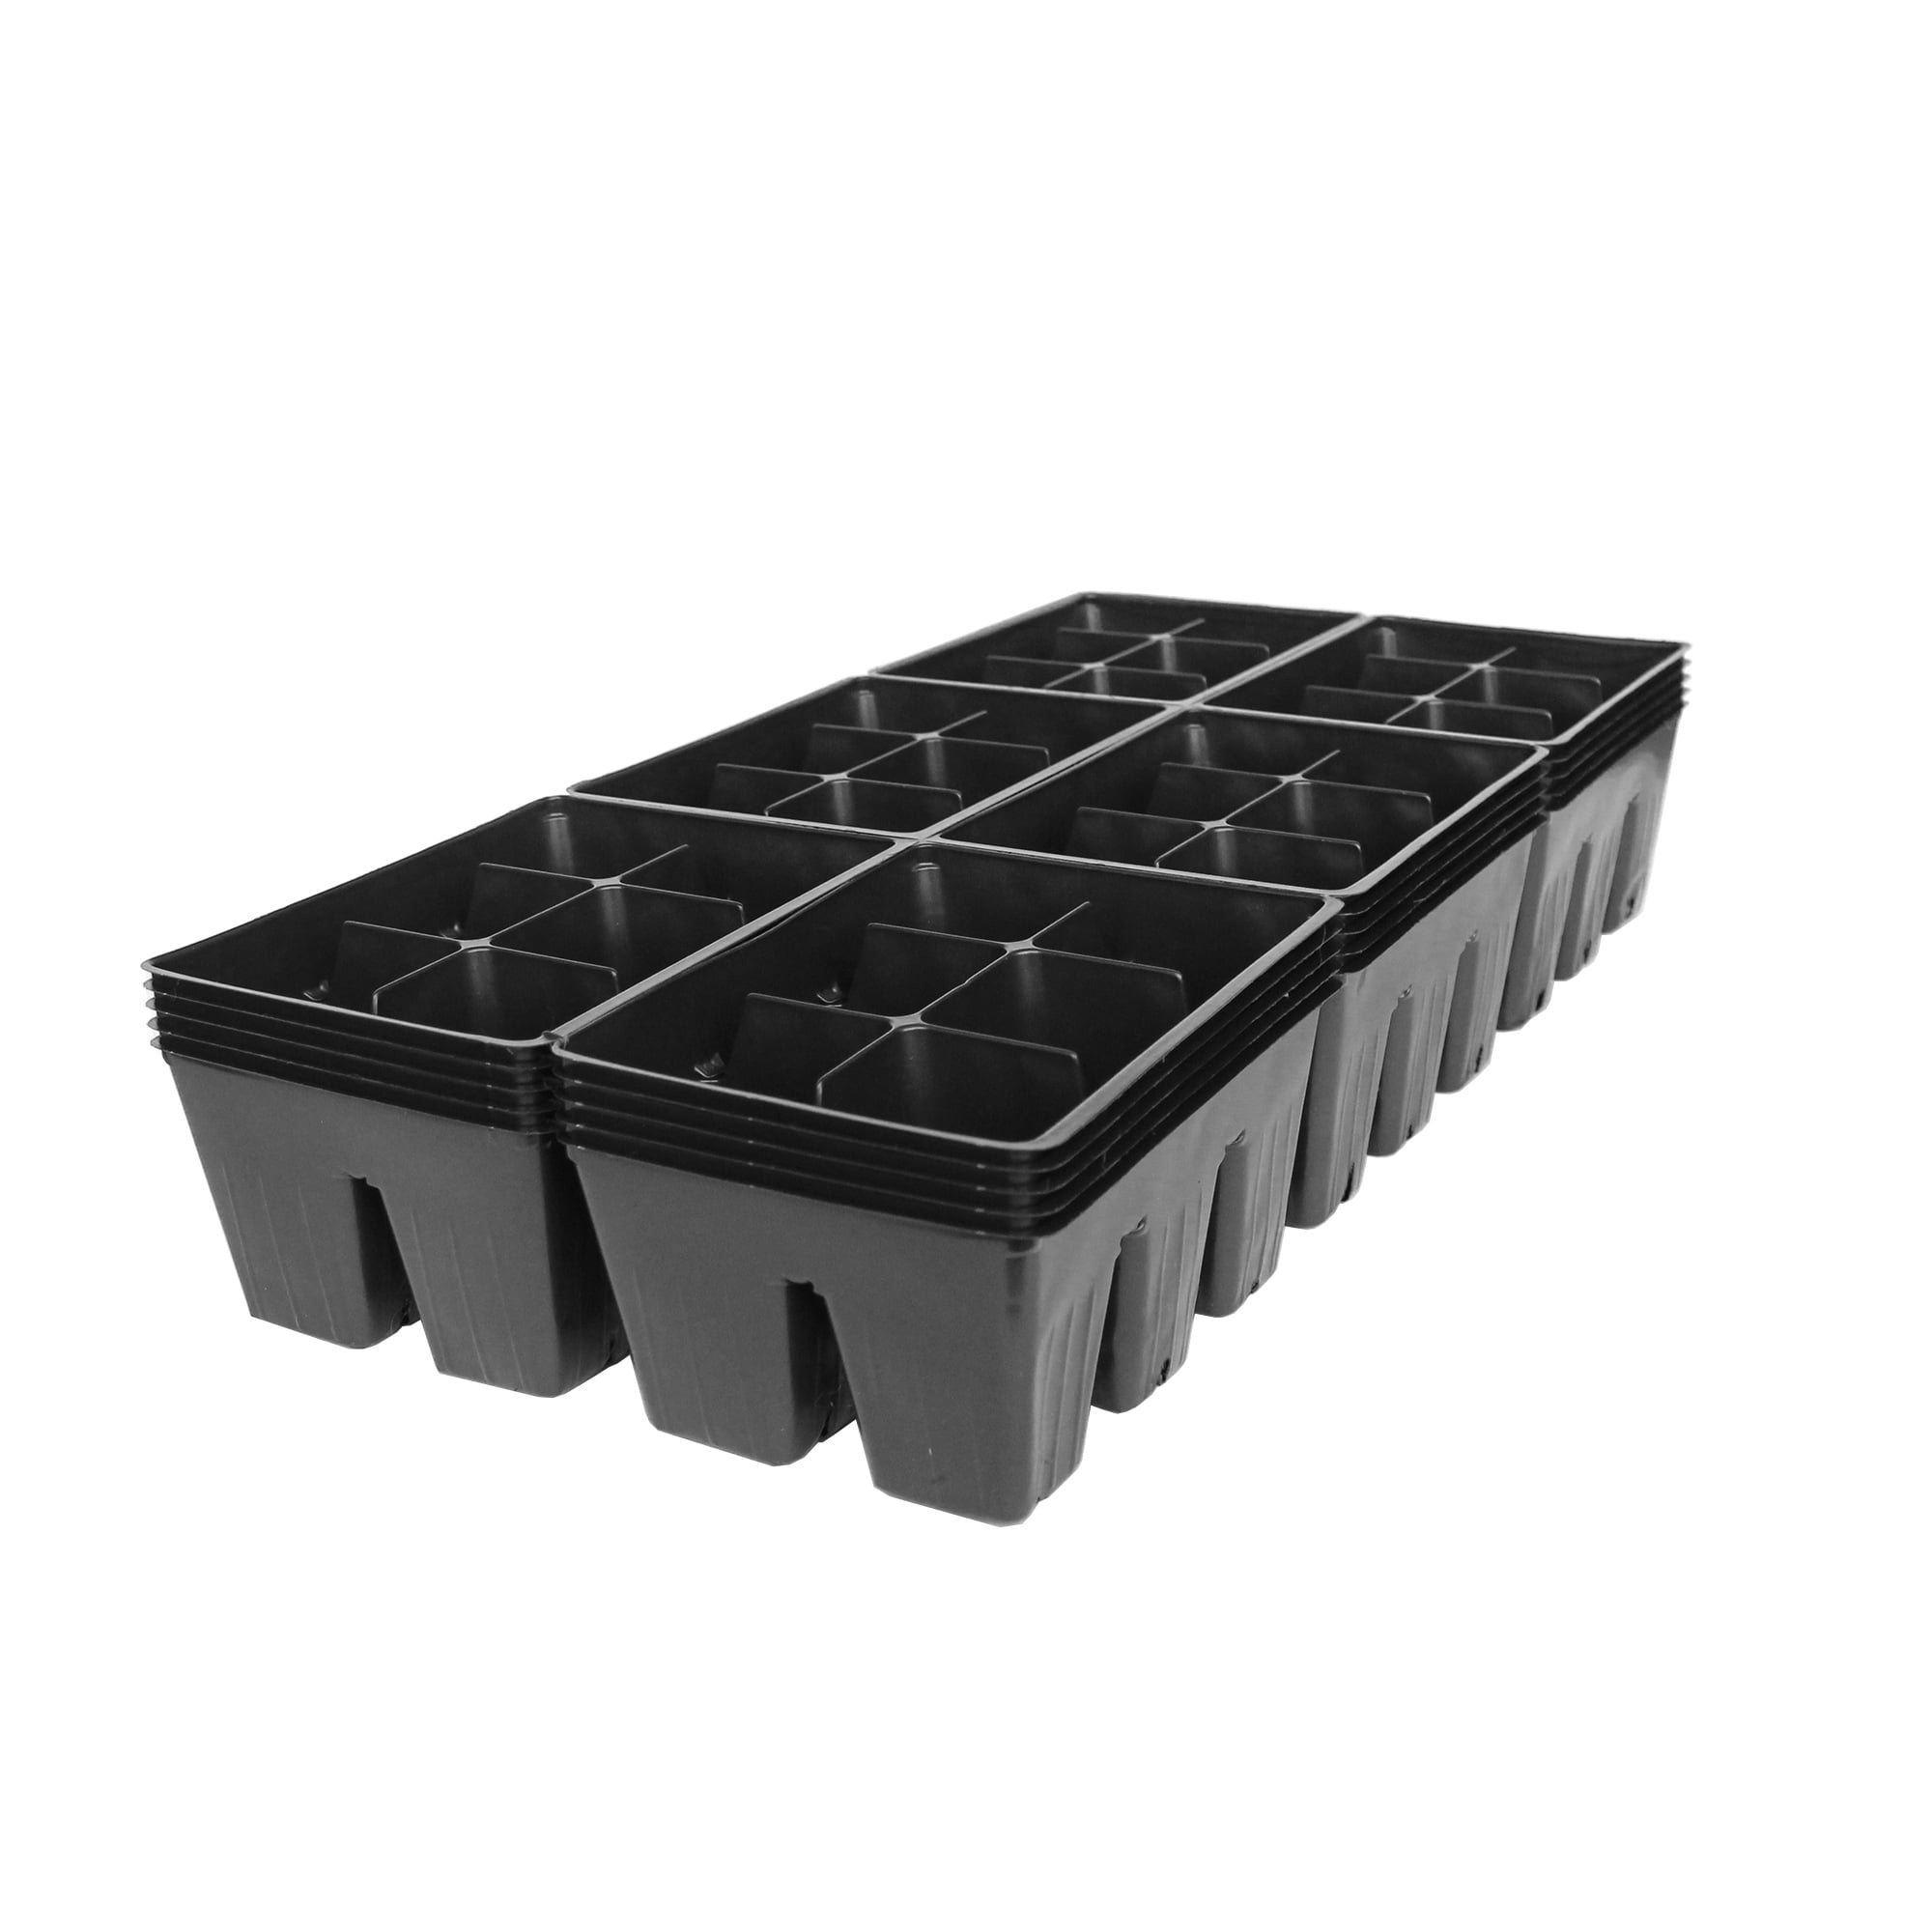 Greenhouse Gardening 5 Sheets of 32 Planting Pot Cells Each Perforated Handy Pantry Black Plastic Garden Tray Inserts 2x2 Nested x8 Configuration Nursery 